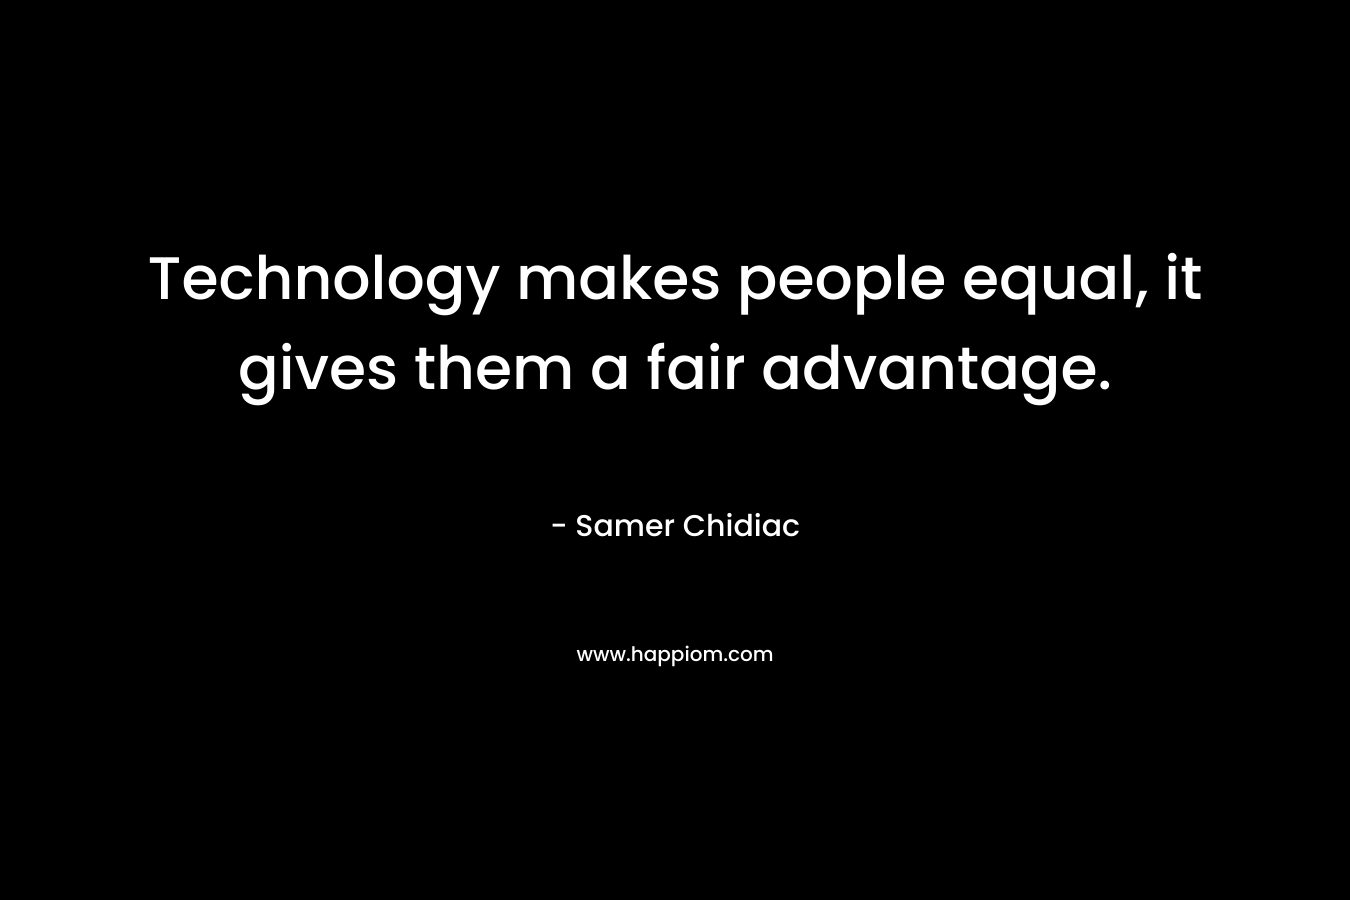 Technology makes people equal, it gives them a fair advantage.